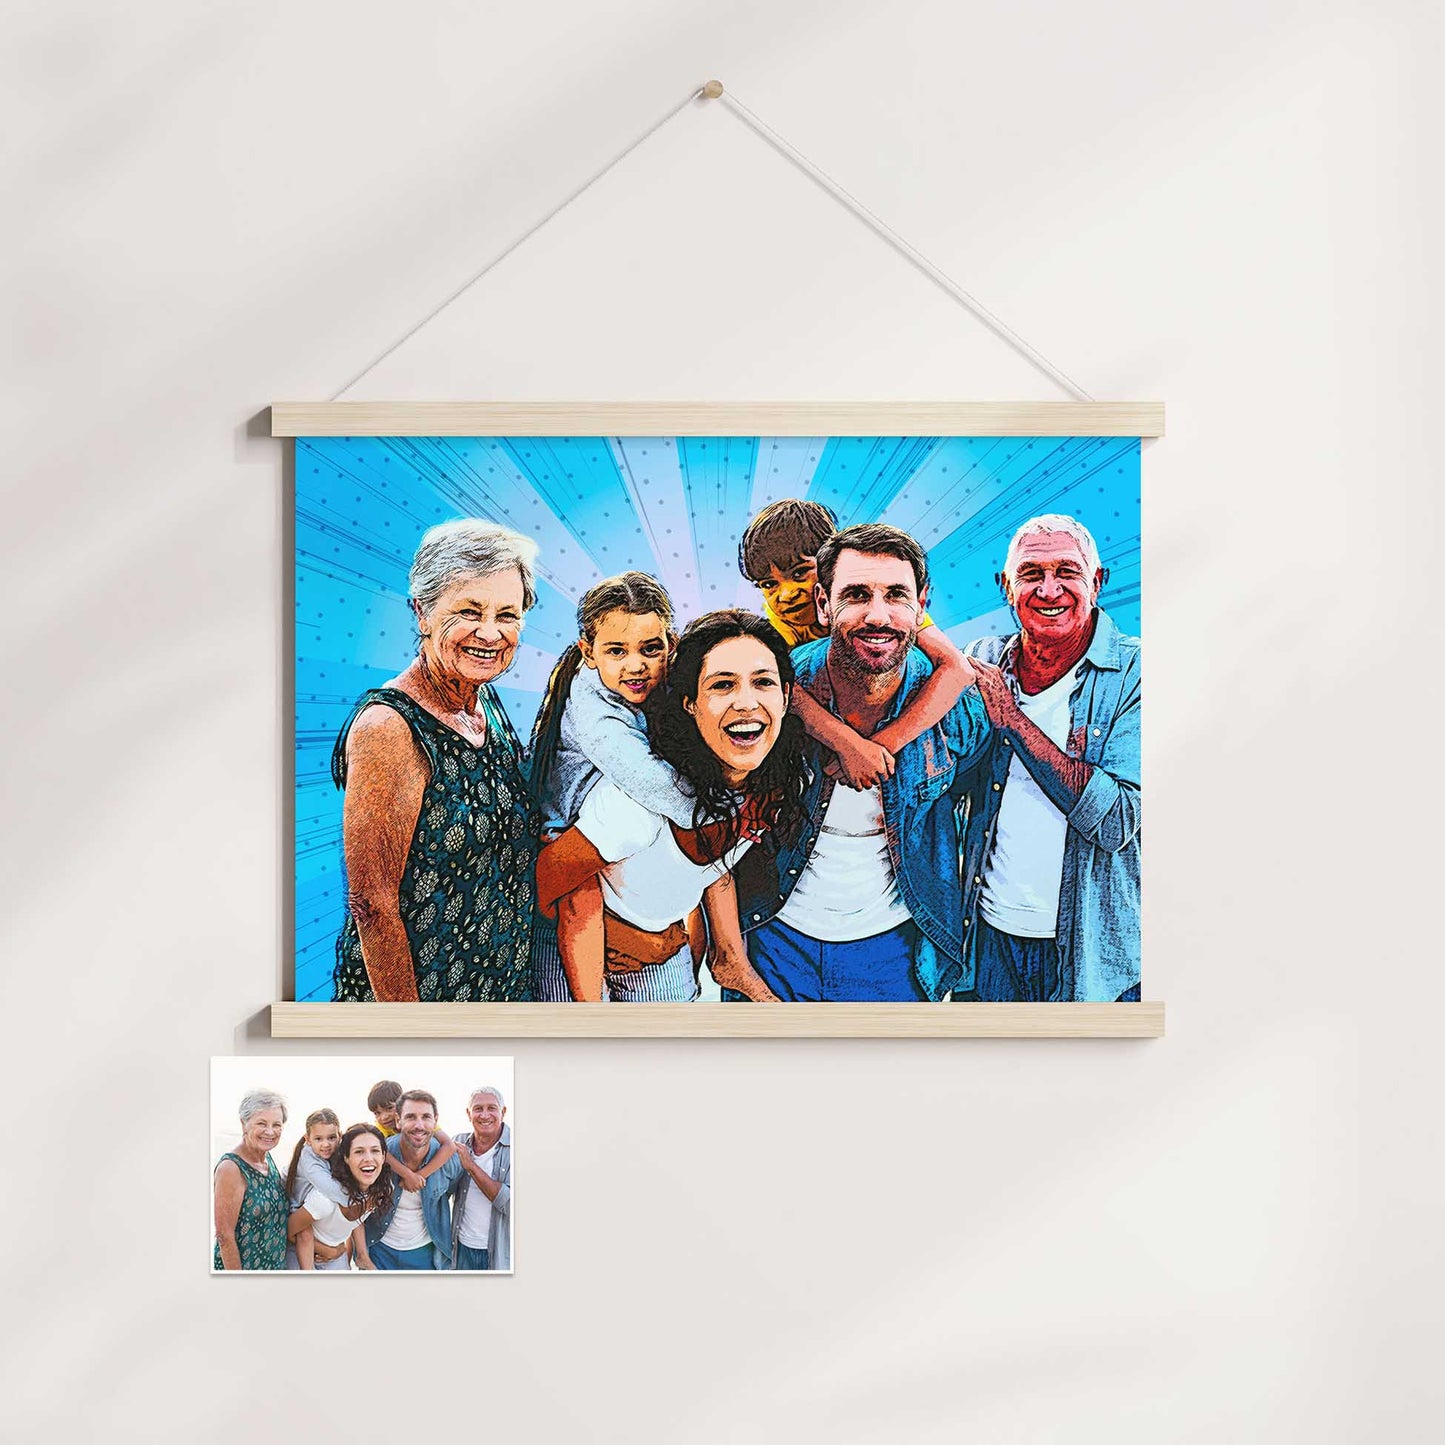 Personalised Cartoon Comics Poster Hanger: Transform your photos into a bespoke piece of art with our made-to-order Cartoon Comics Poster Hanger. The retro comic book effect, combined with the halftone texture, exudes an old school cool vibe